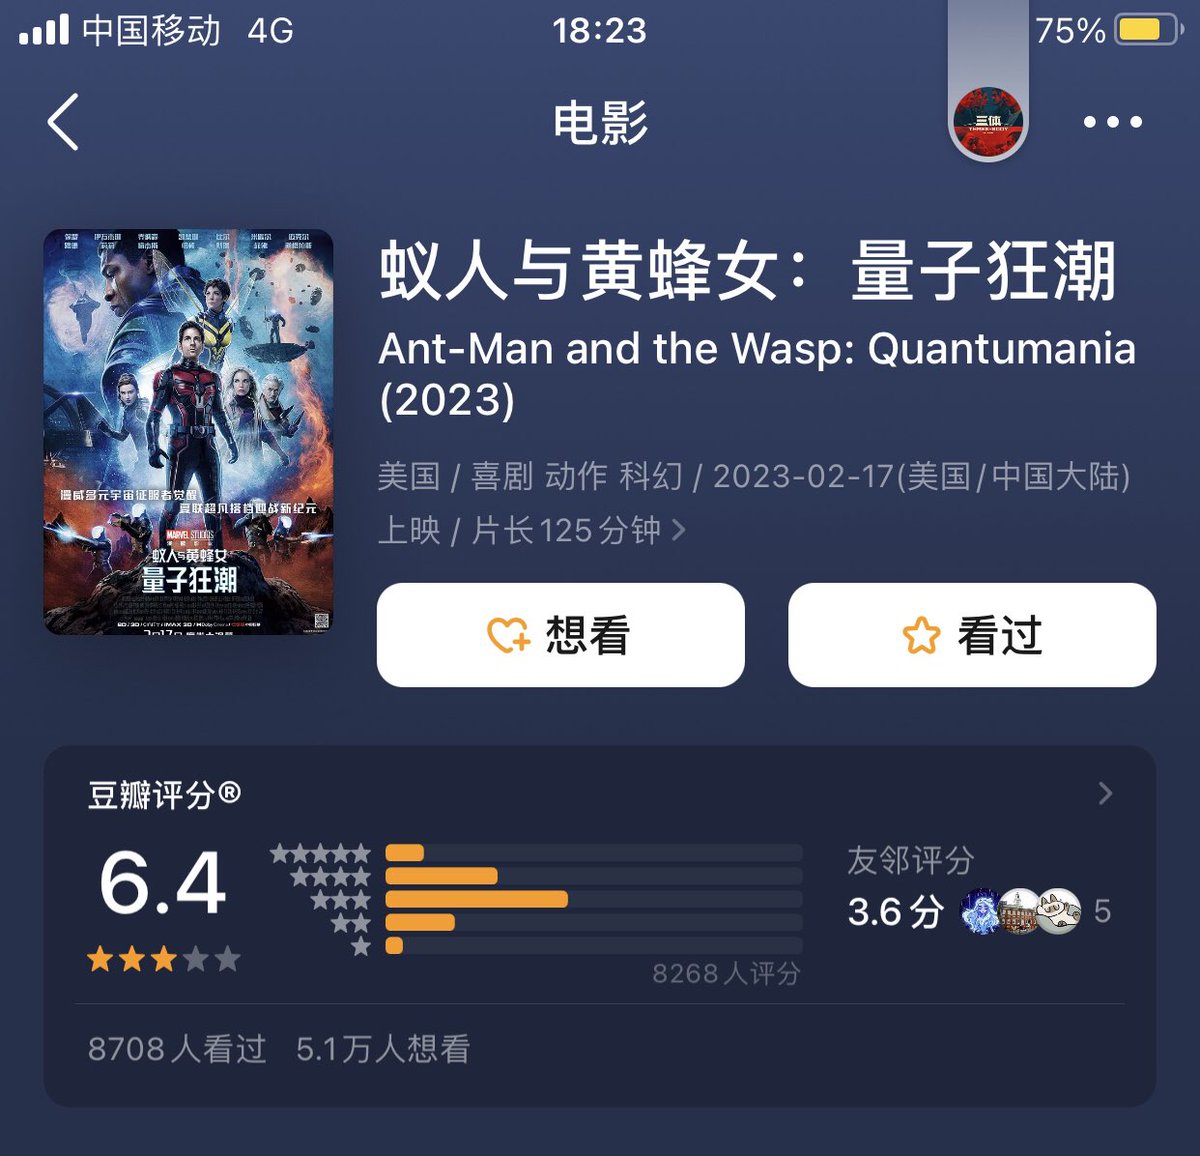 Ant-Man & Wasp 2023 starts with 6.4/10 on Chinese Douban film site. 

For comparison: 

Panther 2 - 5.5/10
Thor 4 - 5.4/10
Strange 2 - 6.3/10
No Way Home - 6.6/10
Eternals- 5.8/10
Shang-Chi- 6.0/10
Widow - 6.2/10
Far From Home - 7.6/10
Endgame - 8.5/10

#AntManAndTheWasp https://t.co/ZuMU9tL5pc